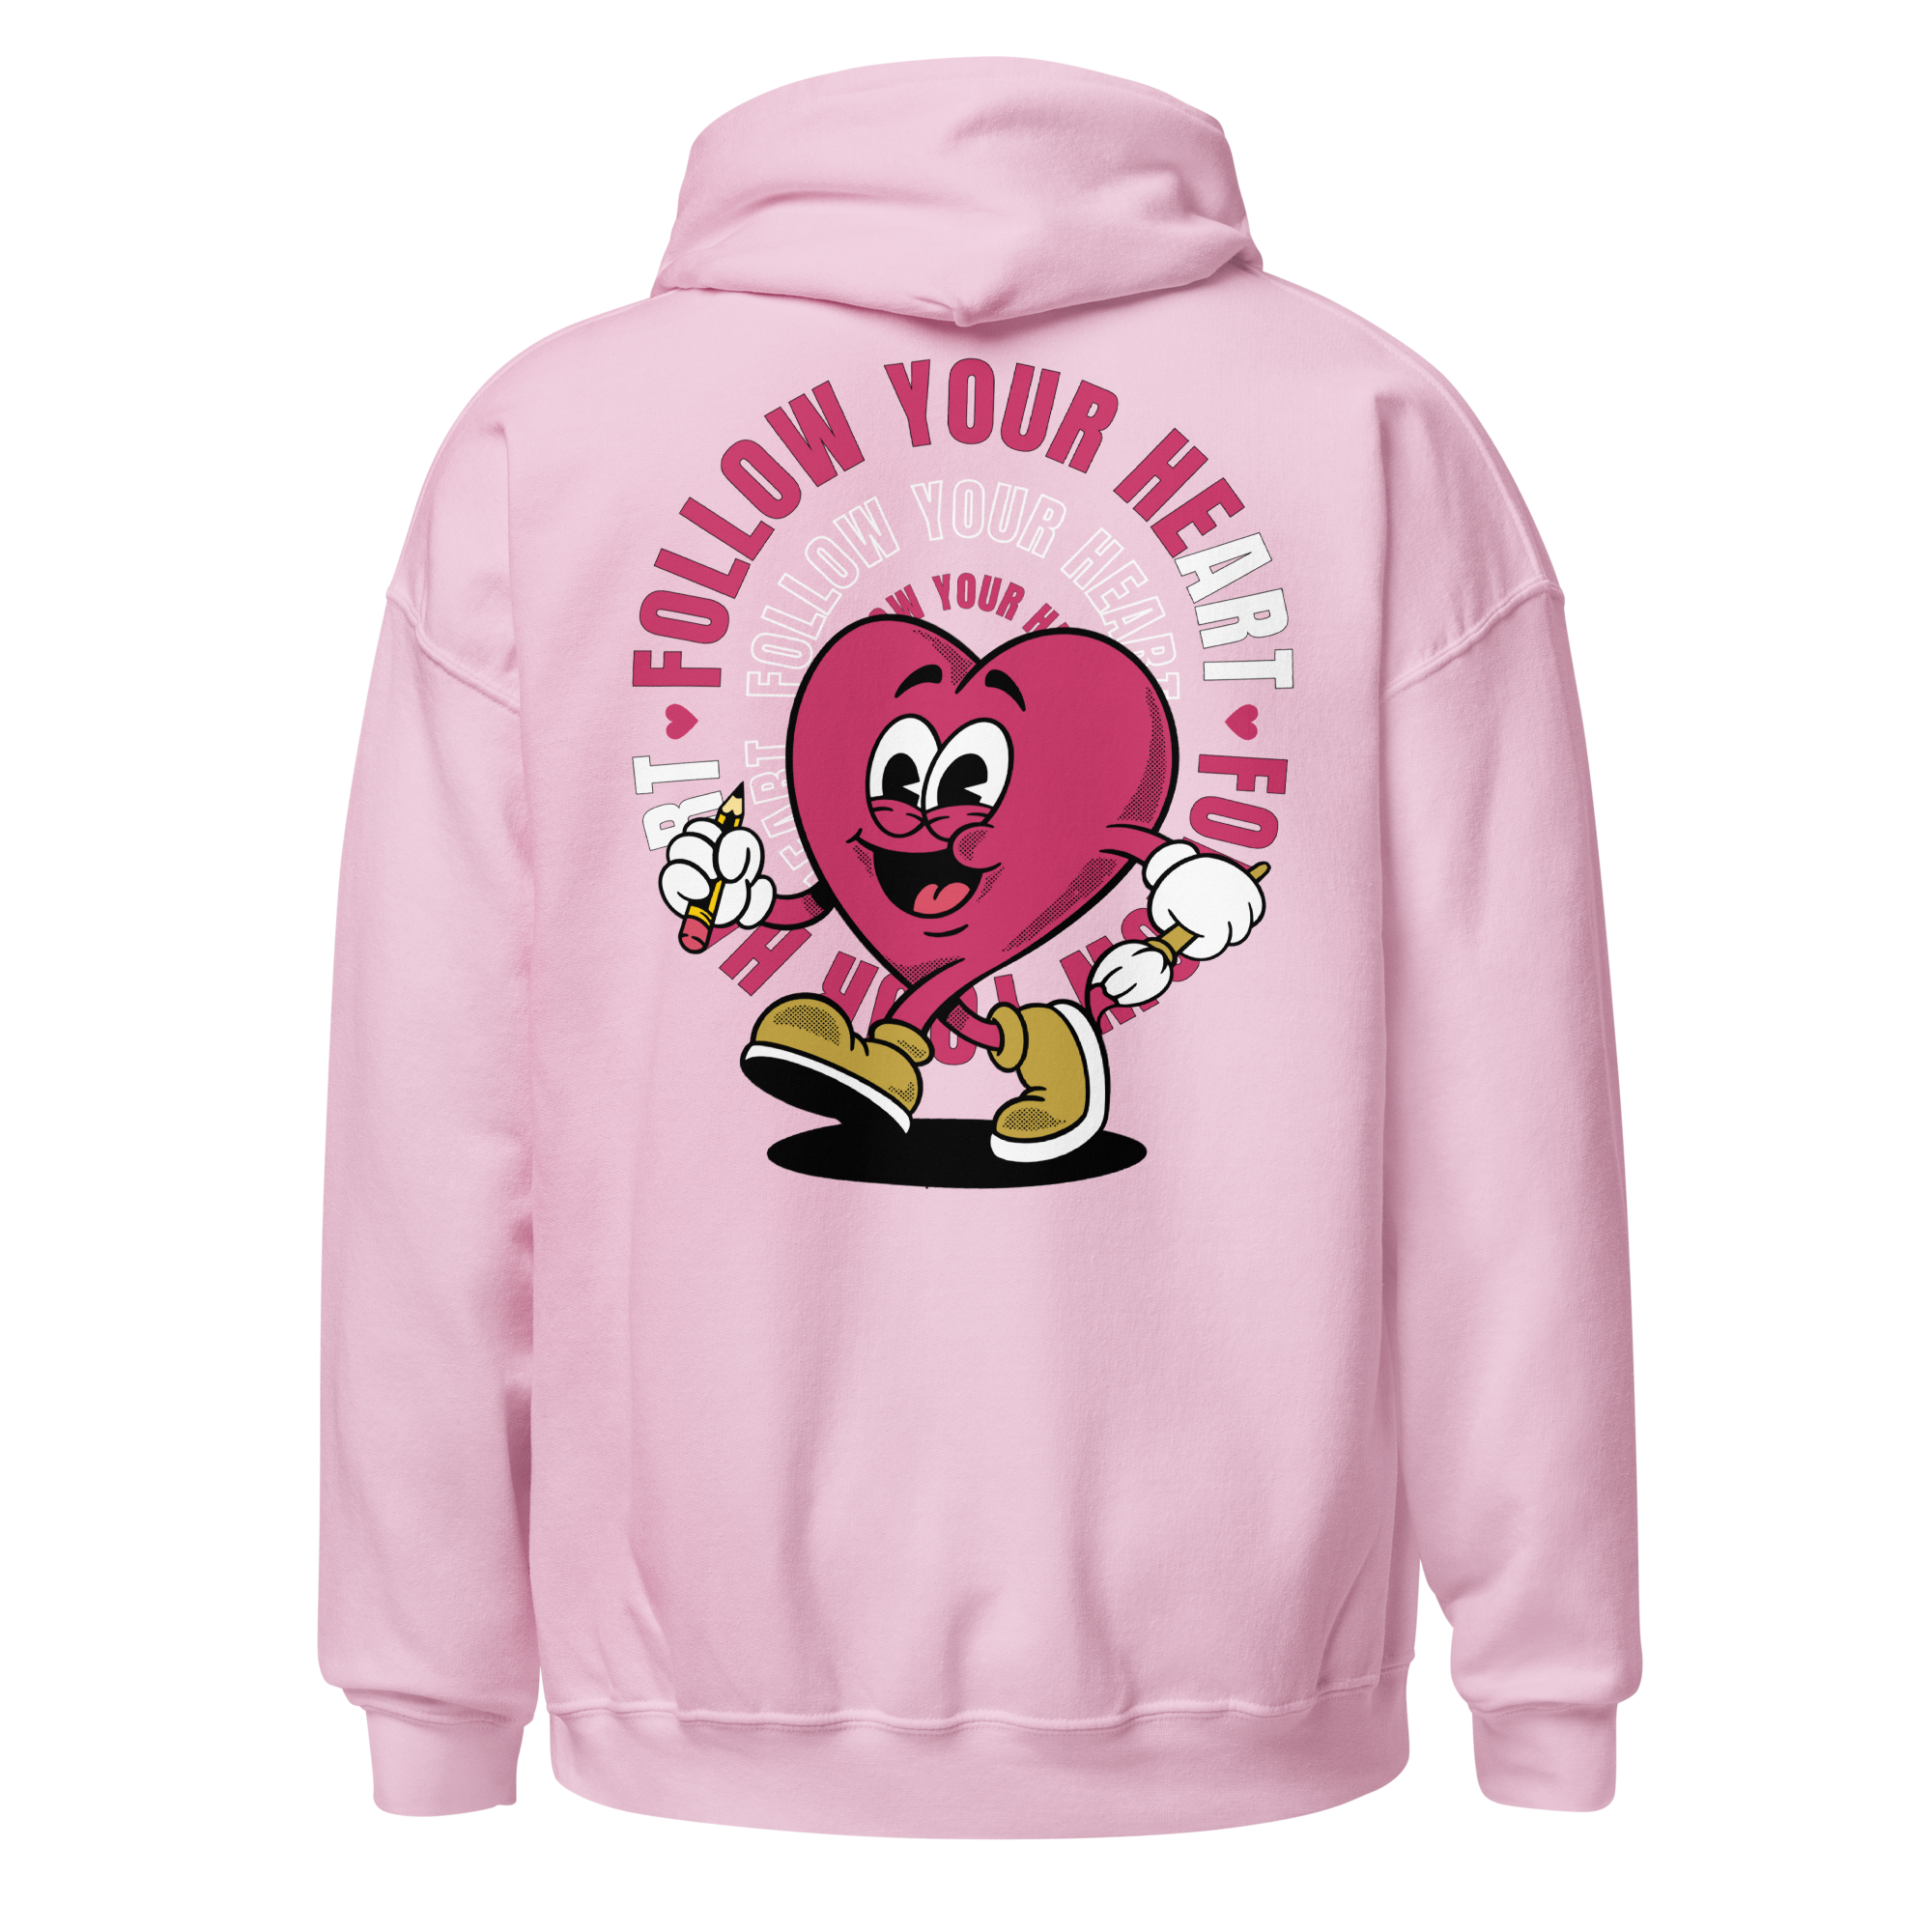 Follow Your Heart Embroidery Hoodie - Pink on Pink (Unisex)